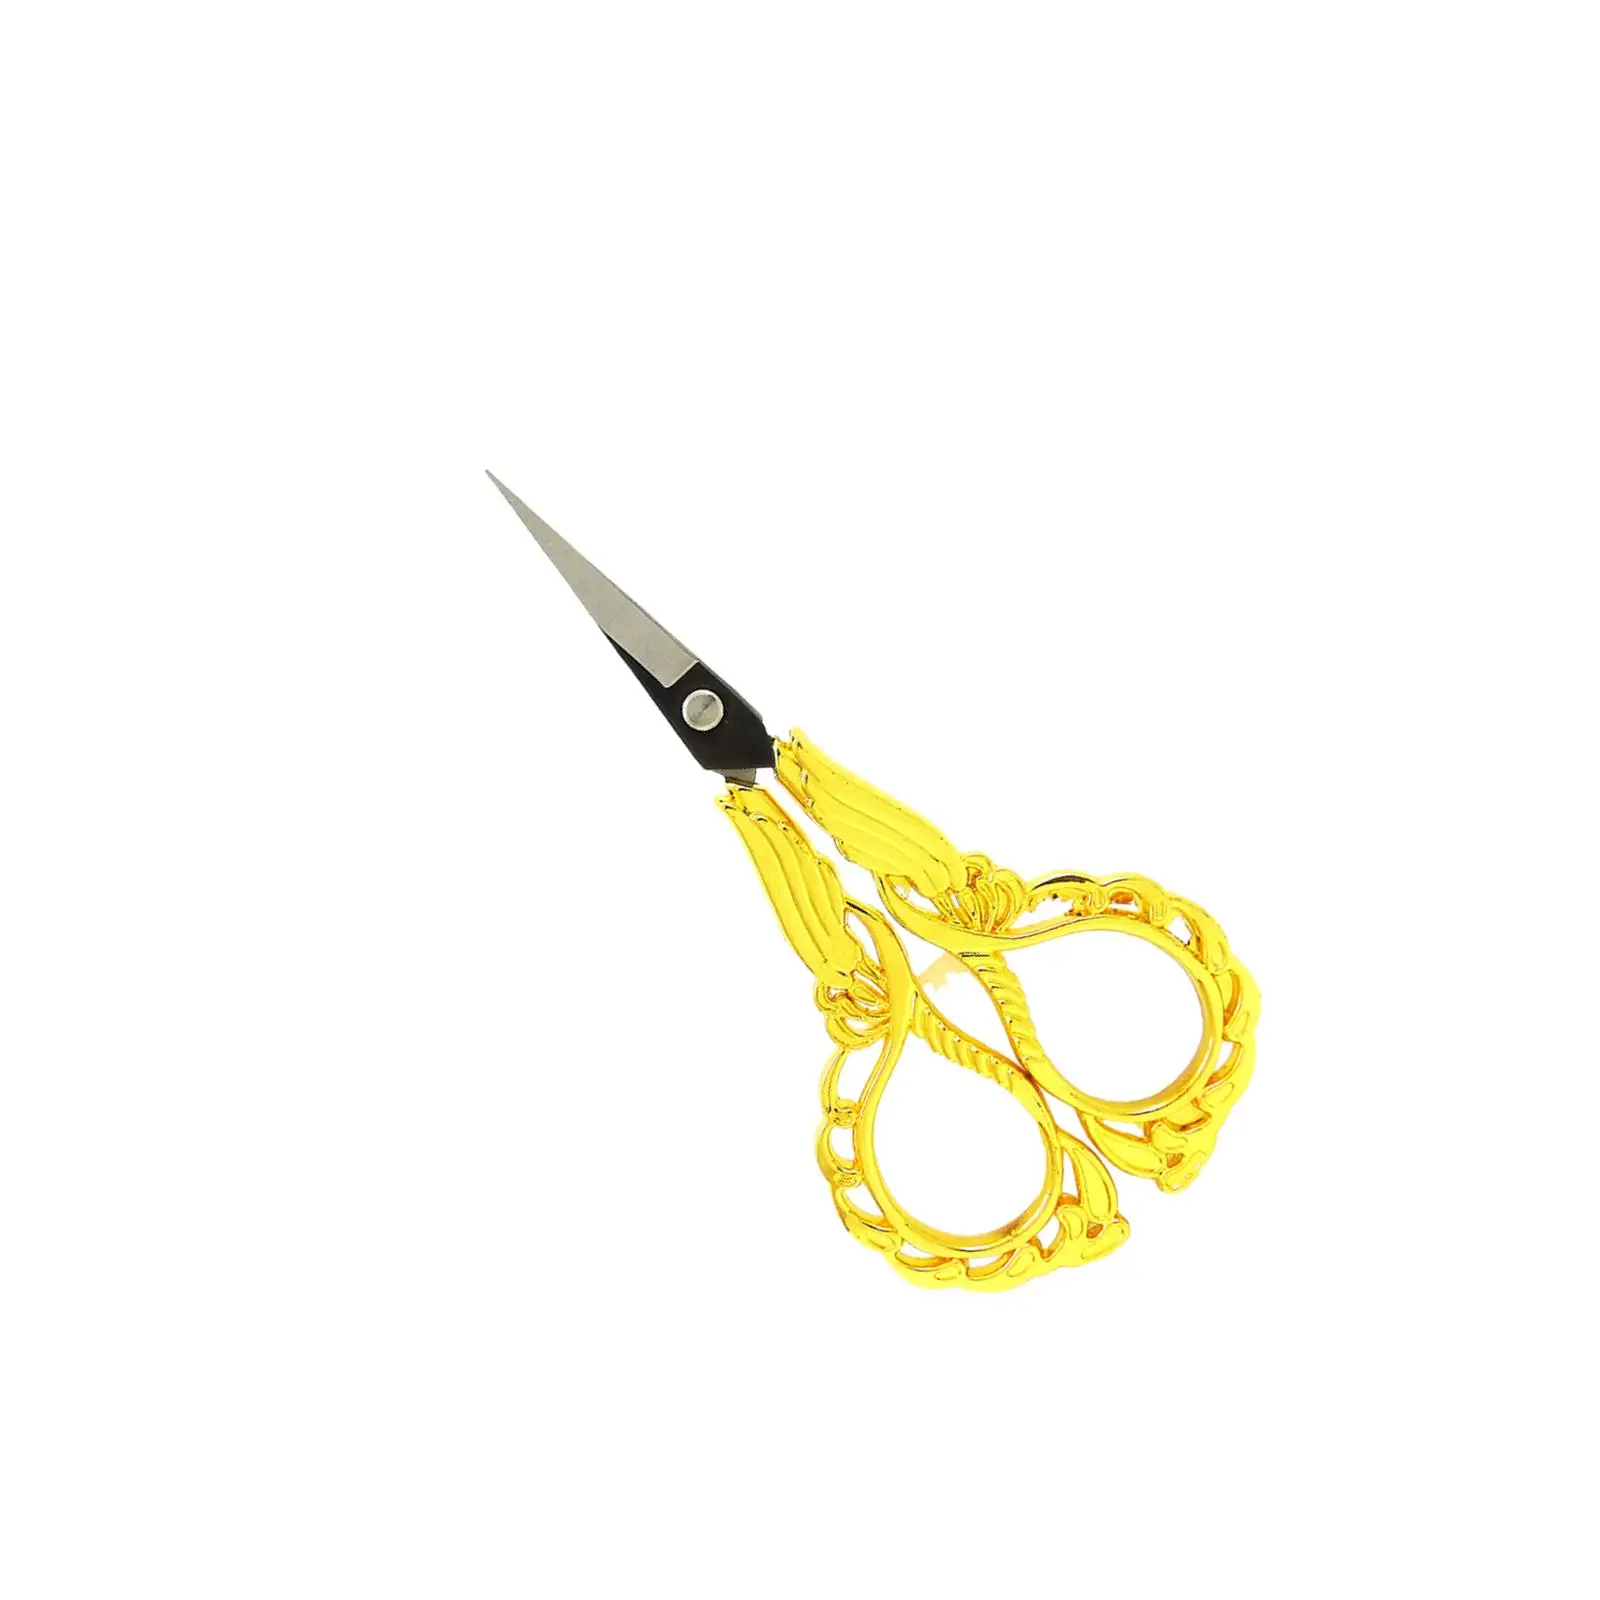 Embroidery Scissors Retro Style Cutting Tool Sewing for Household Sewing Craft